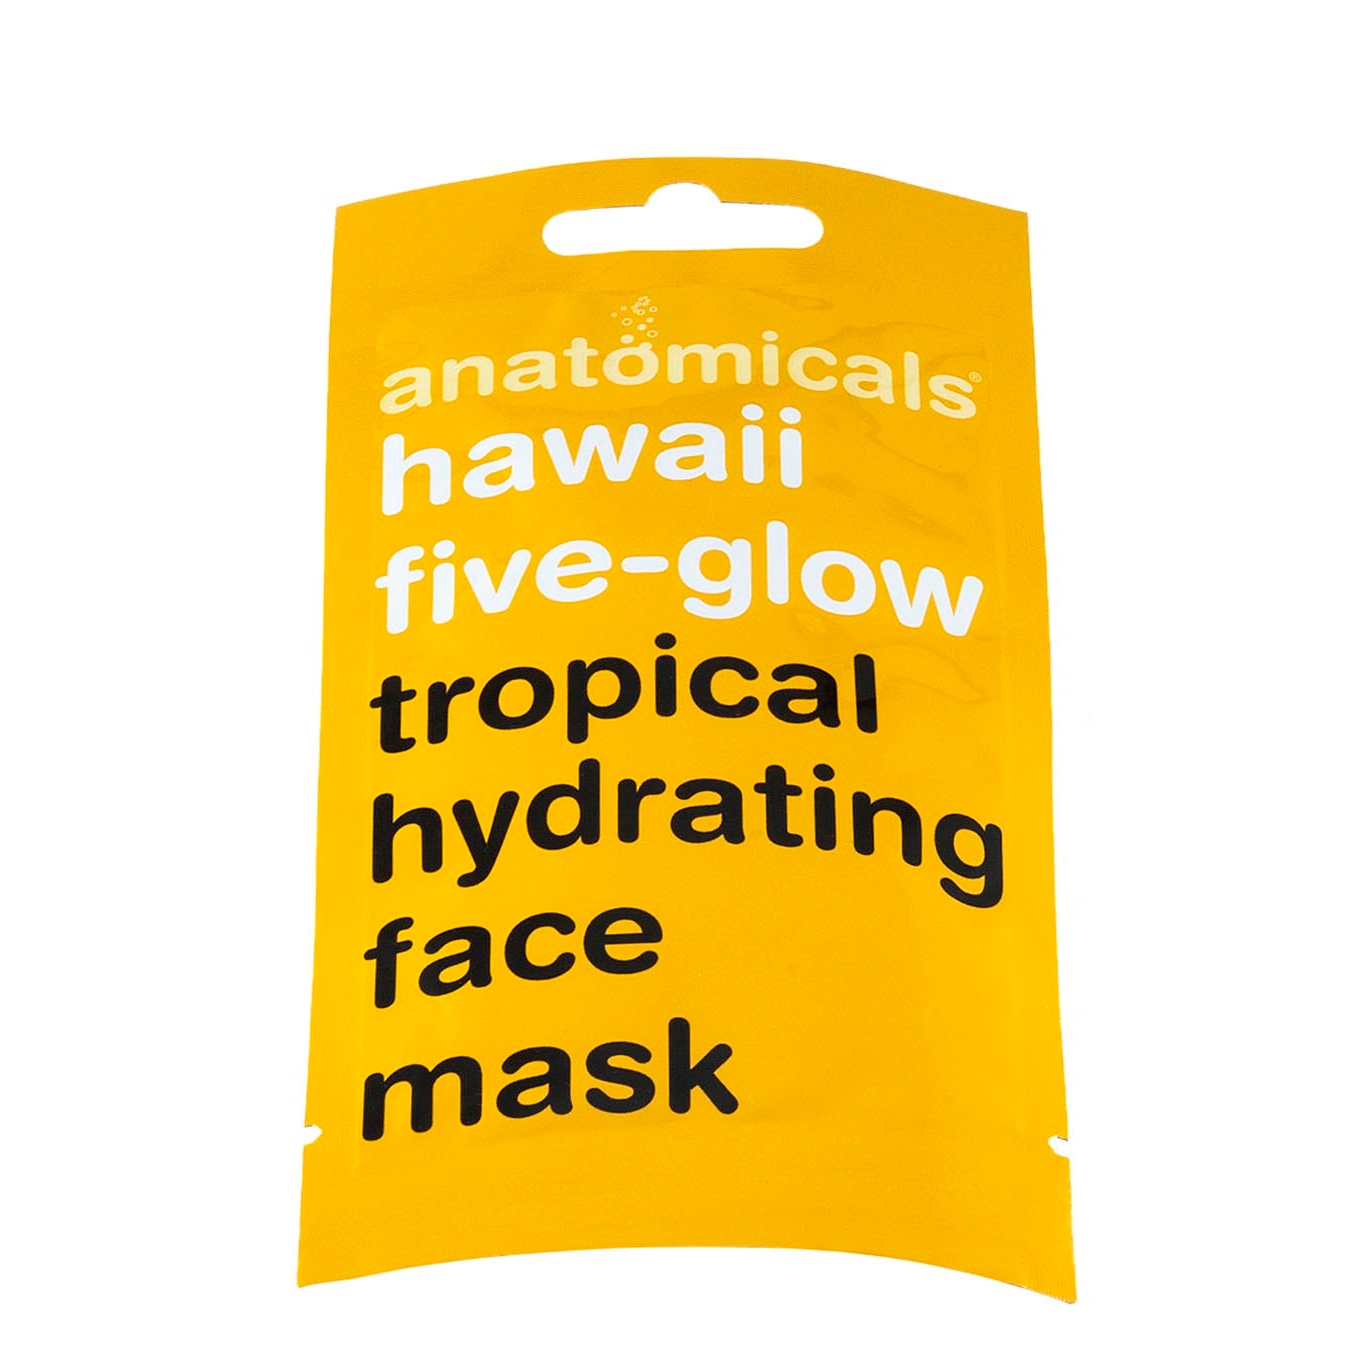 Anatomicals Hawaii Five-Glow Tropical Hydrating Face Mask